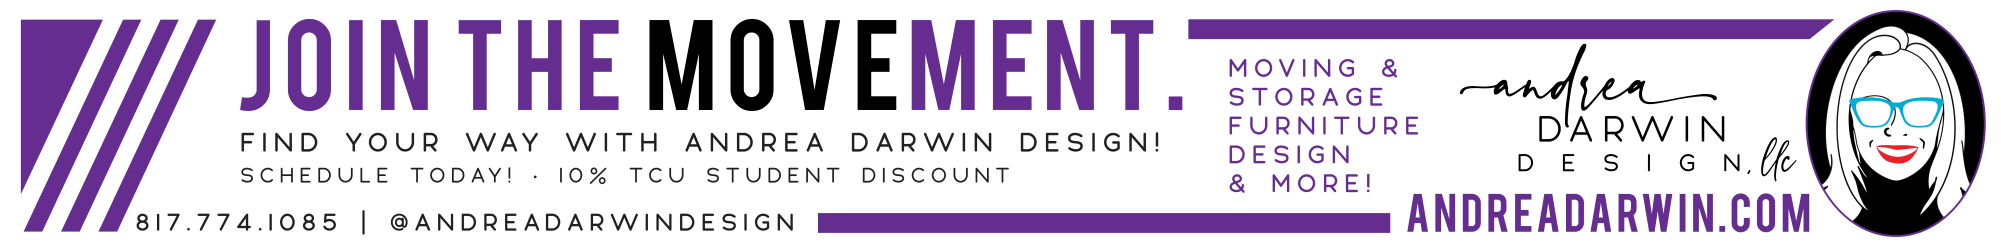 Ad text: Join the movement. Find your way with Andrea Darwin Design! Schedule today! Ten percent T C U student discount. Moving and storage, furniture design and more. Andrea Darwin Design L L C. andrea darwin dot com. 817-774-1085. @andreadarwindesign